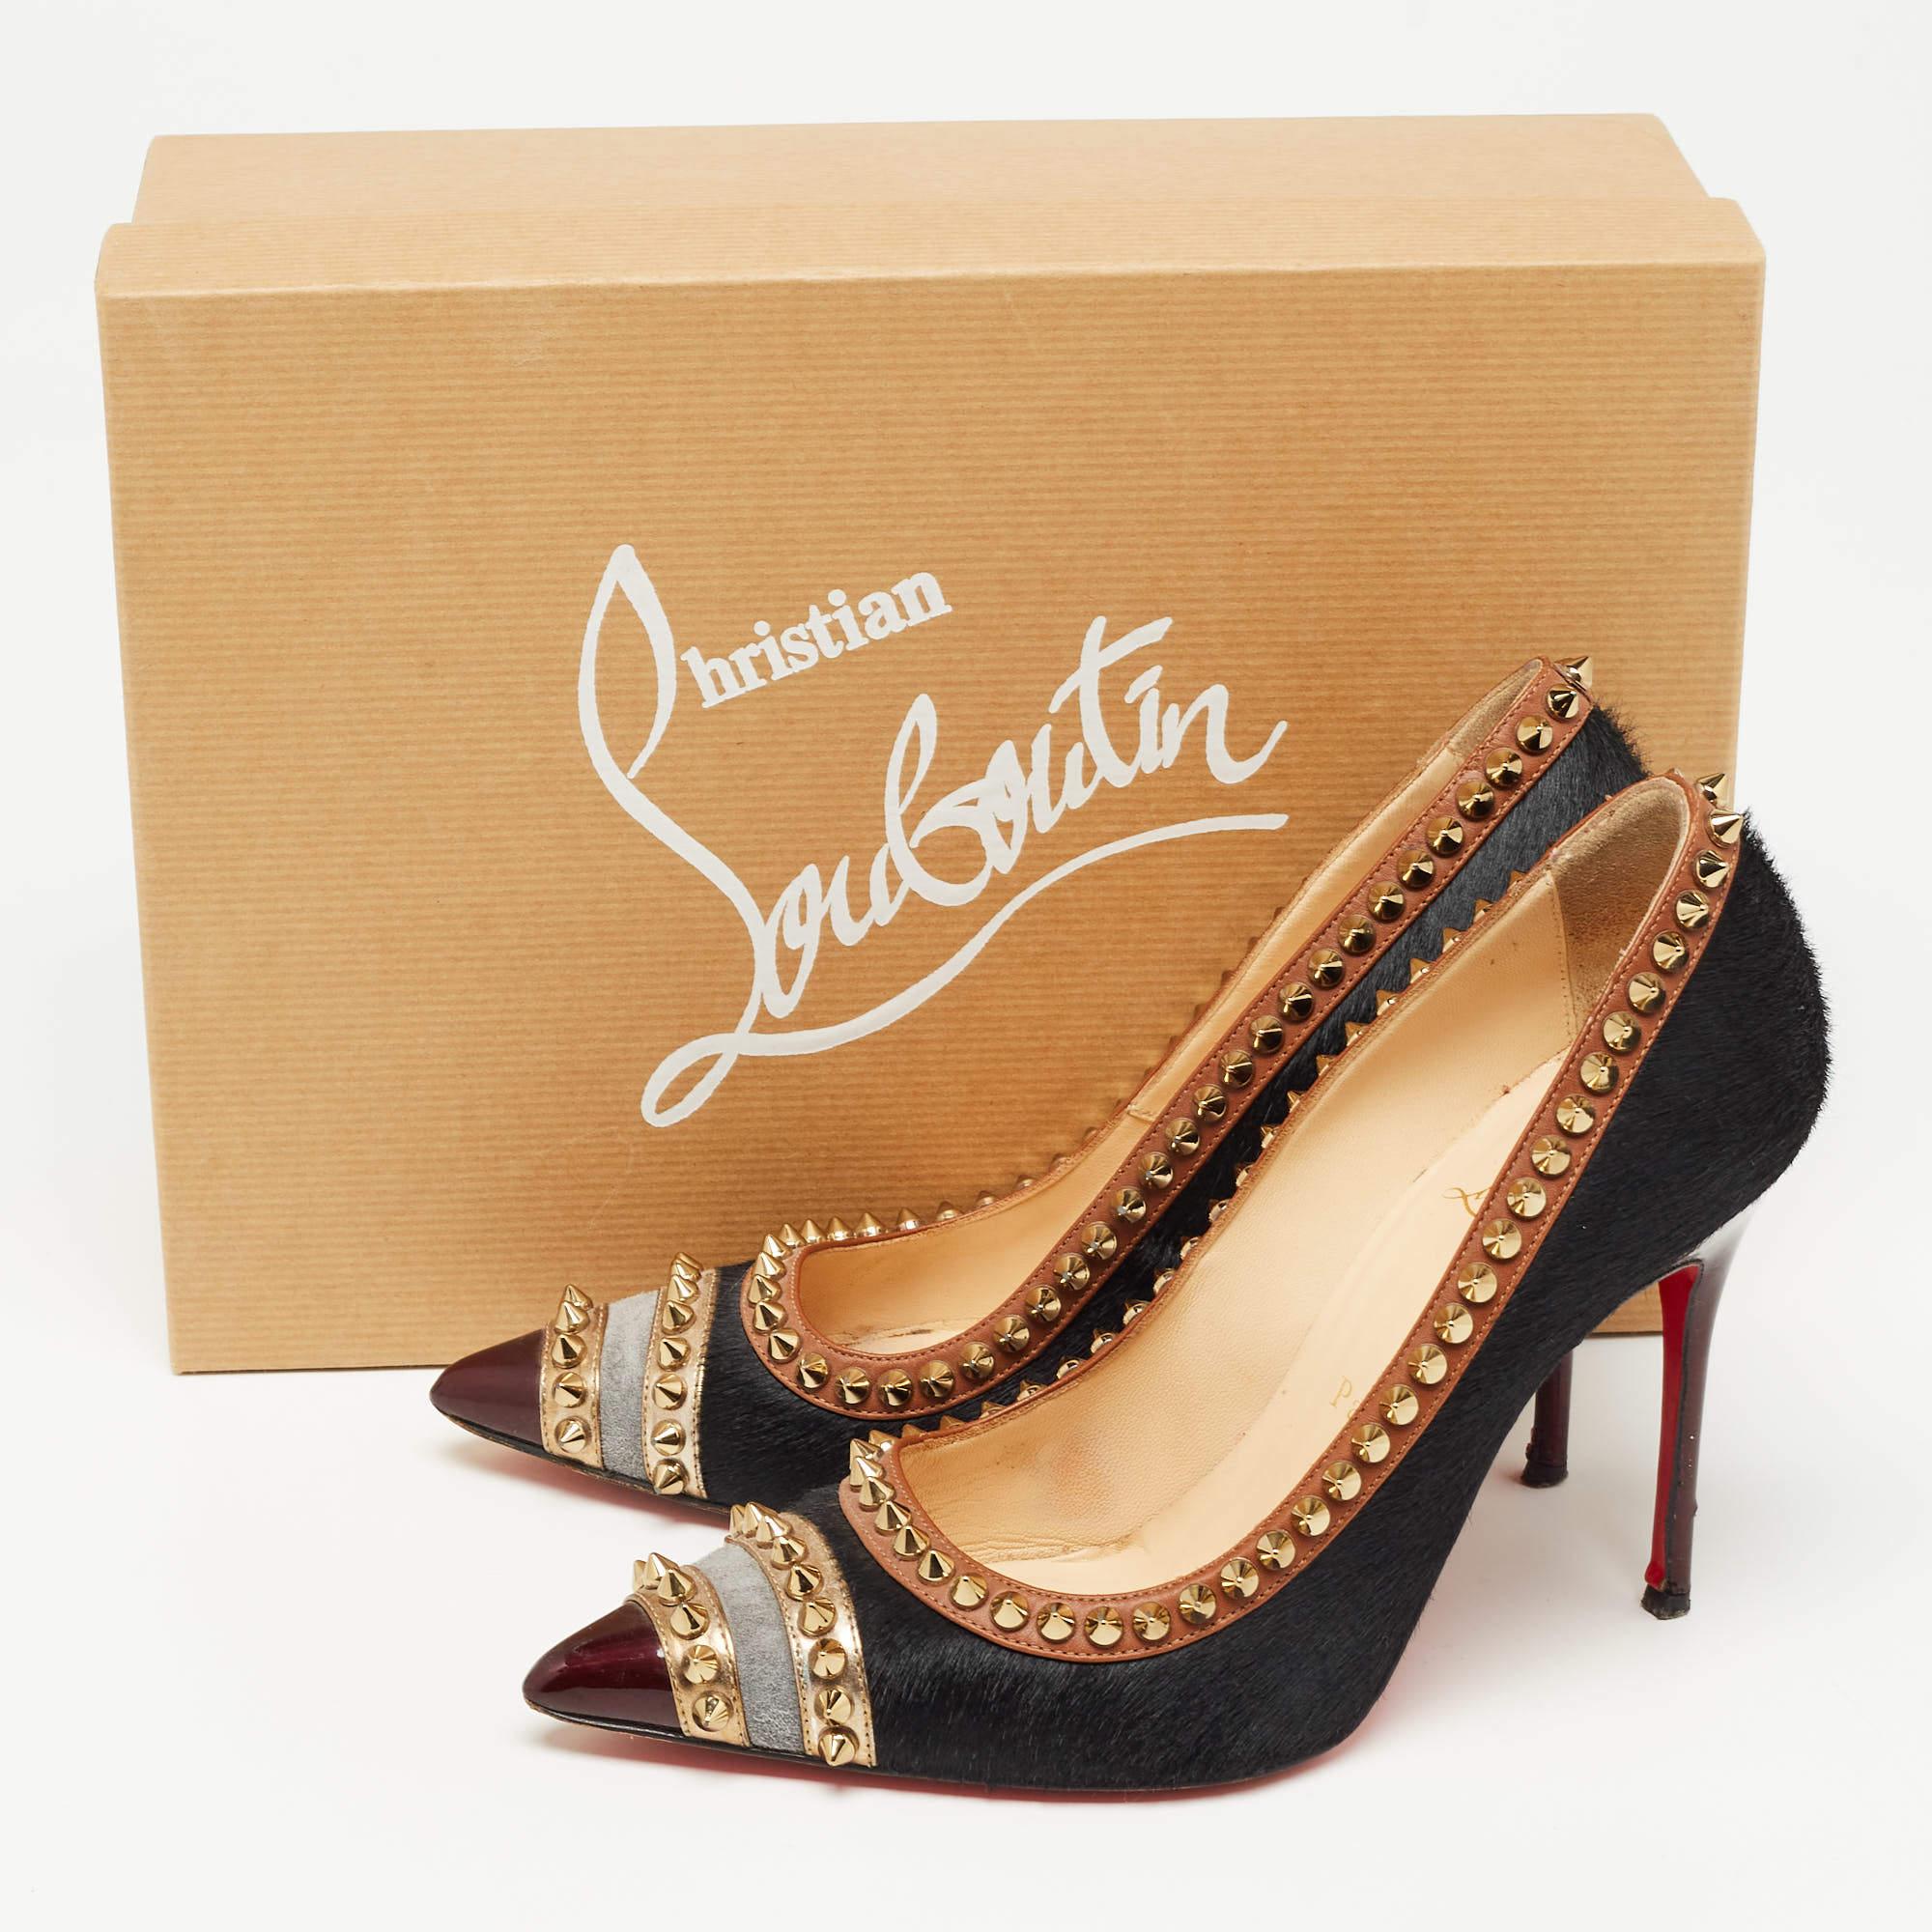 Christian Louboutin Black Calf Hair and Leather Malabar Hill Pumps Size 36 For Sale 6